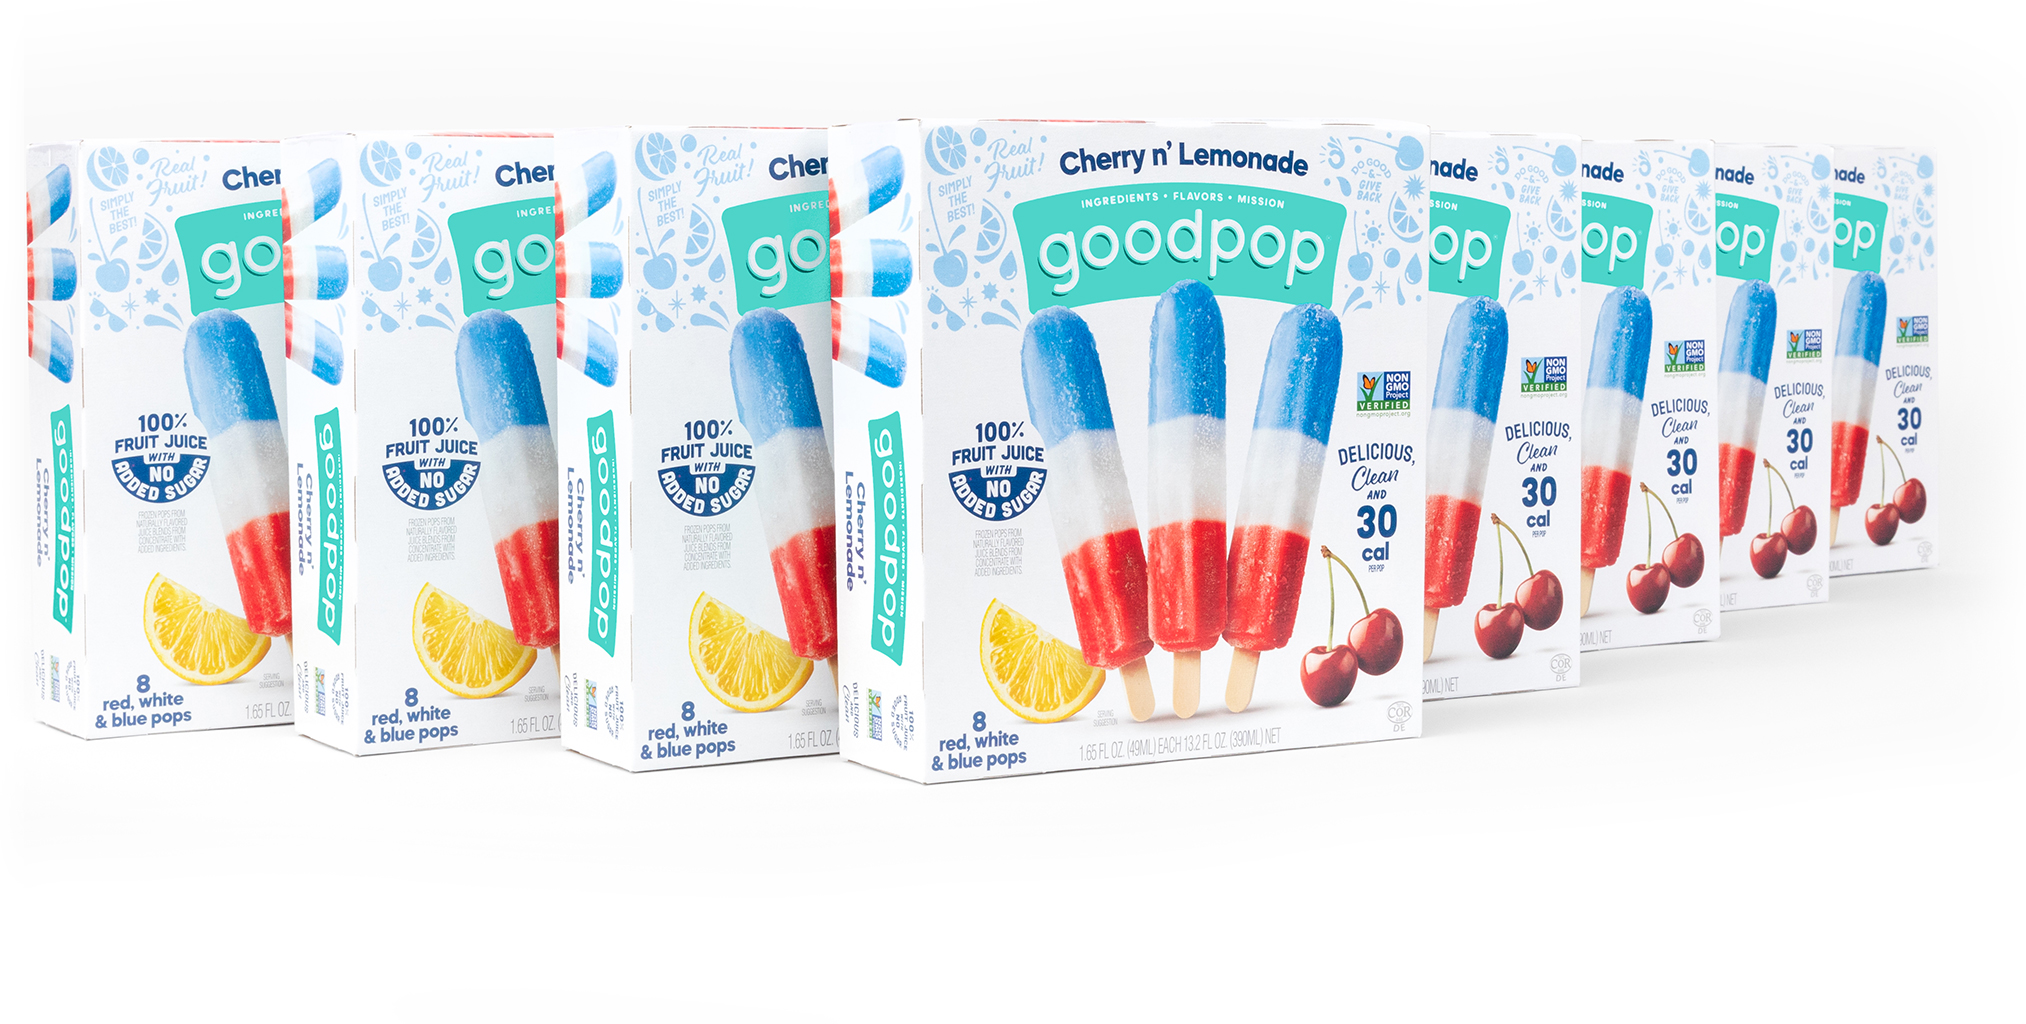 Red, White & Blue Pops Pack boxes